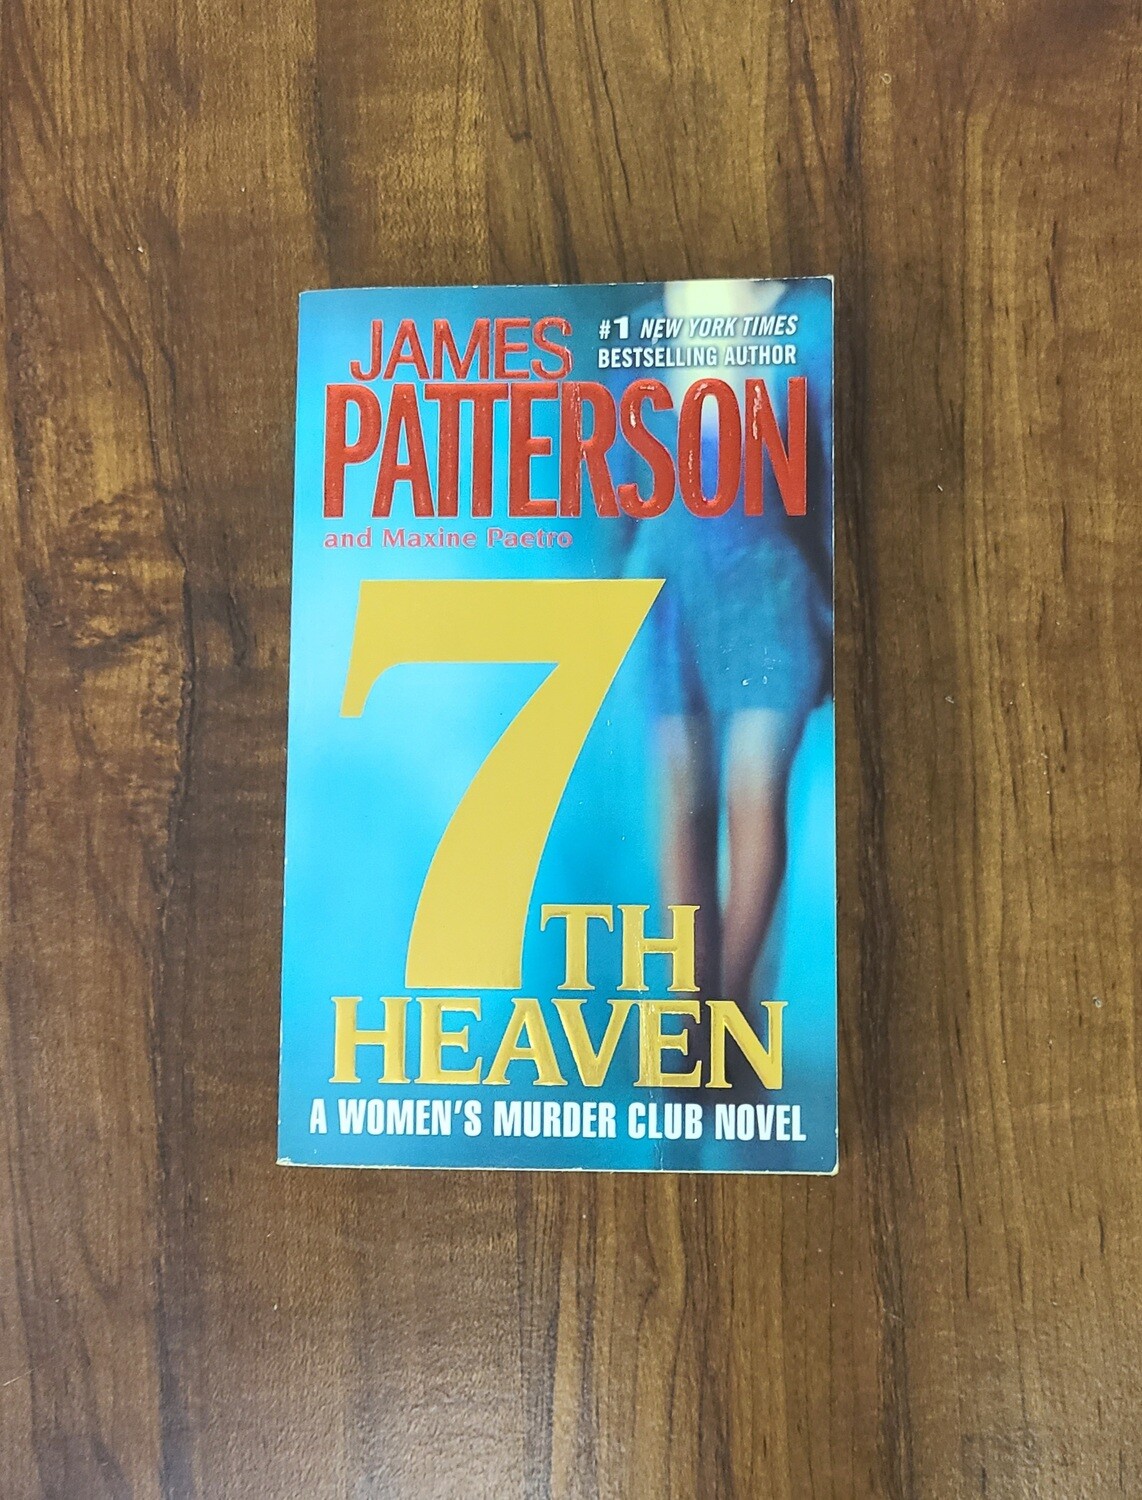 7th Heaven by James Patterson and Maxine Paetro - Paperback